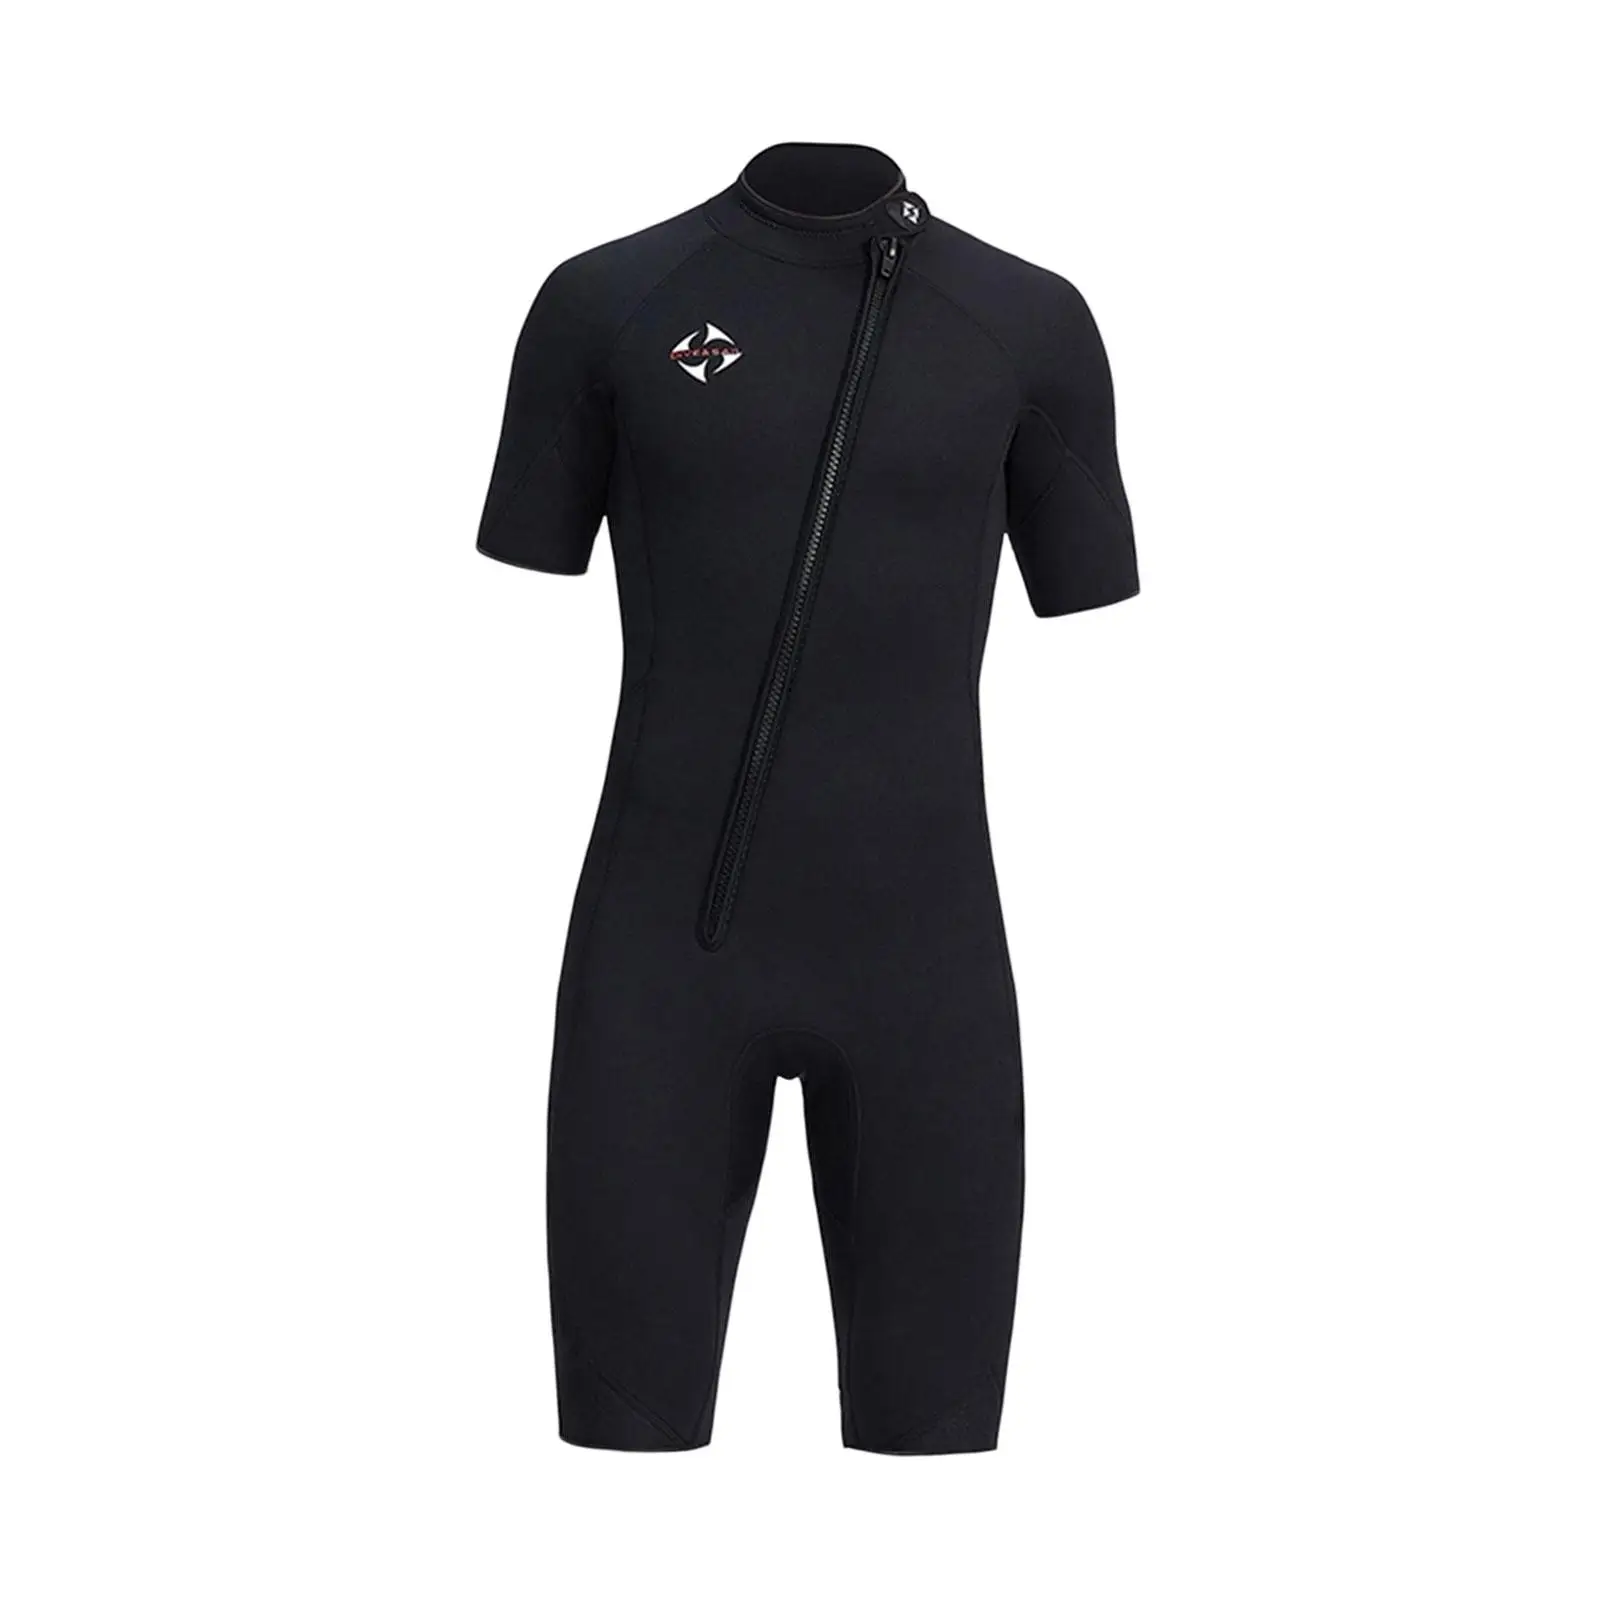 Men Wetsuit Scuba Diving Suit Keep Warm for Canoeing Dive Skin Swimming